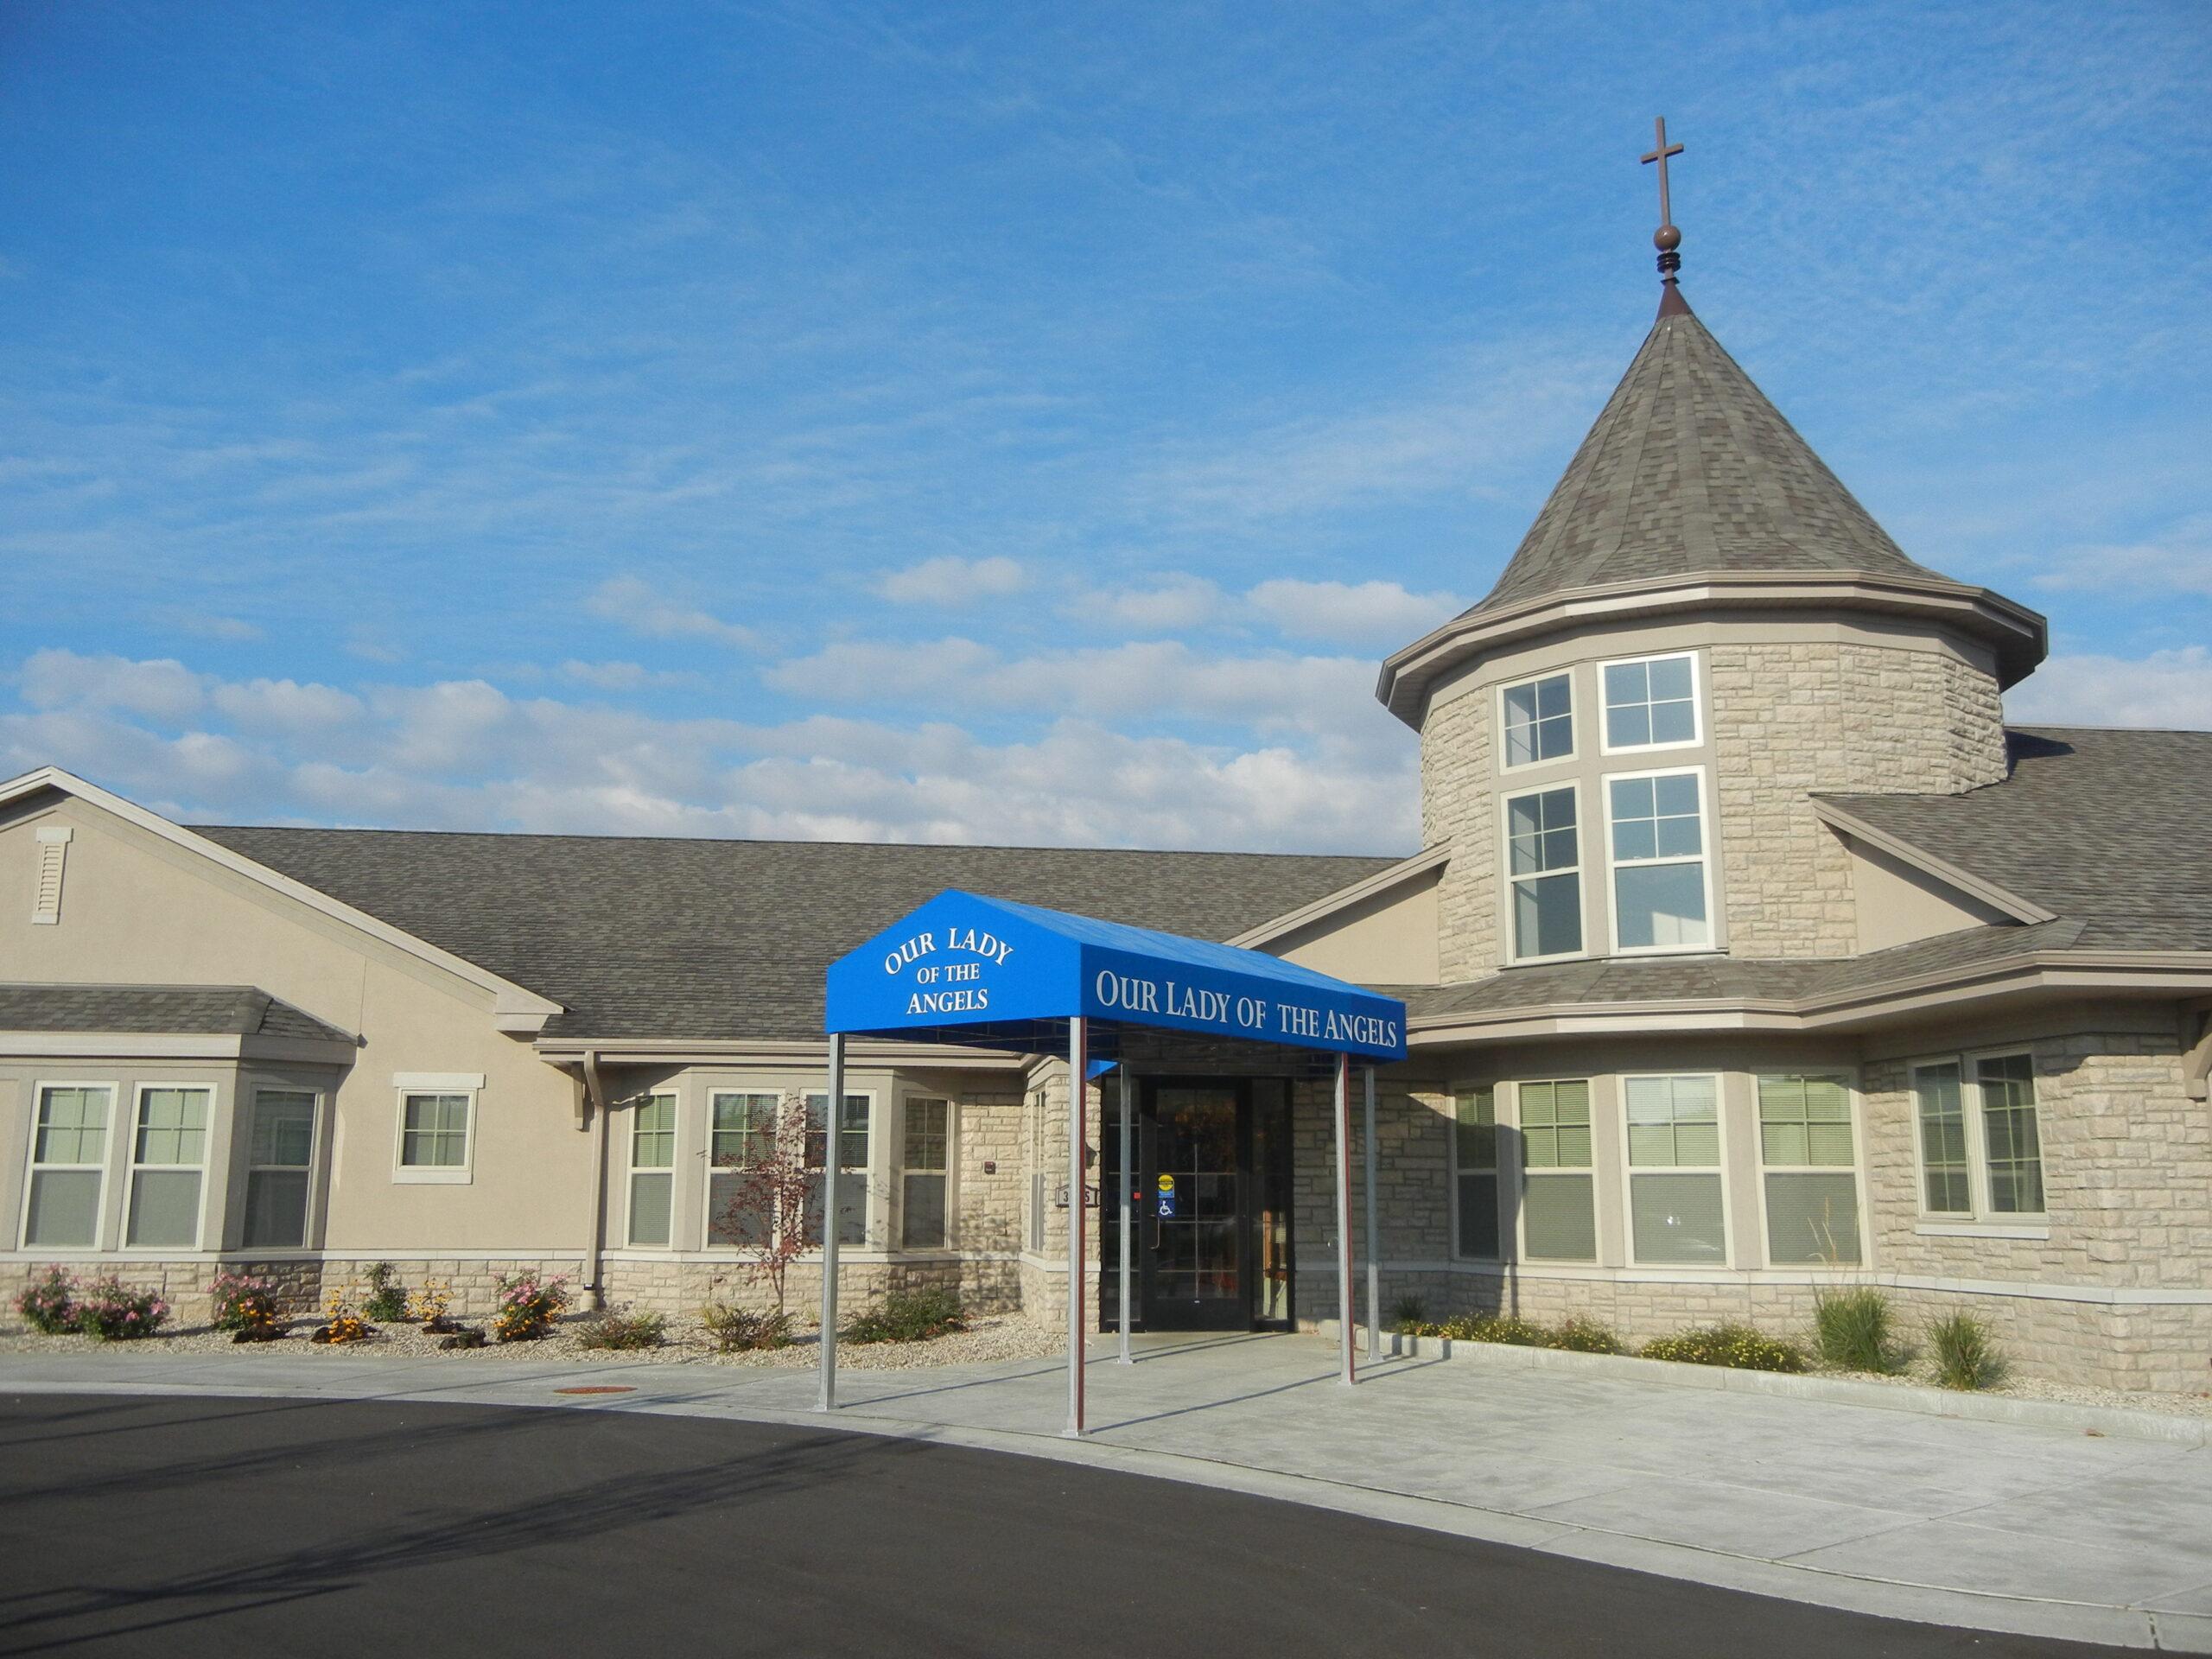 Our Lady of the Angels Convent in Greenfield